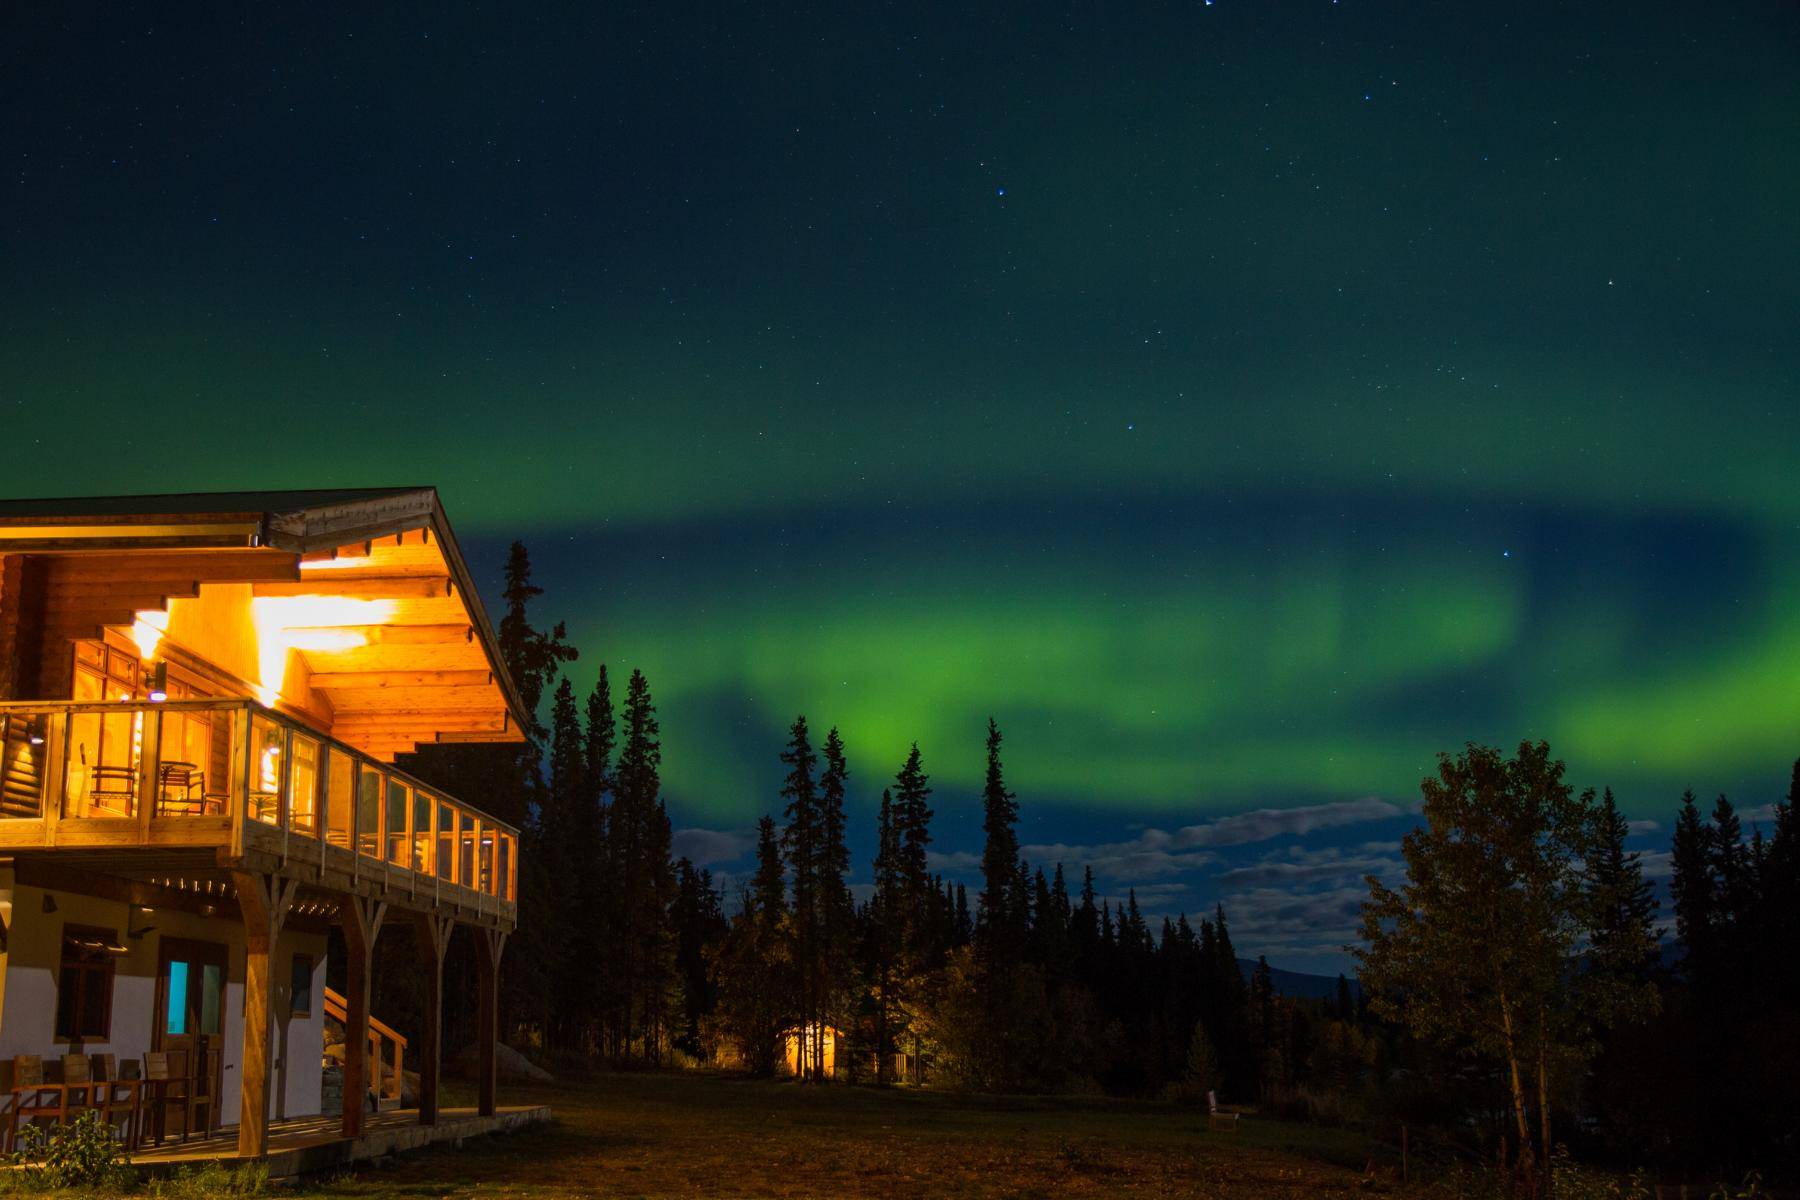 lit main house in summer at night with northern lights in the sky